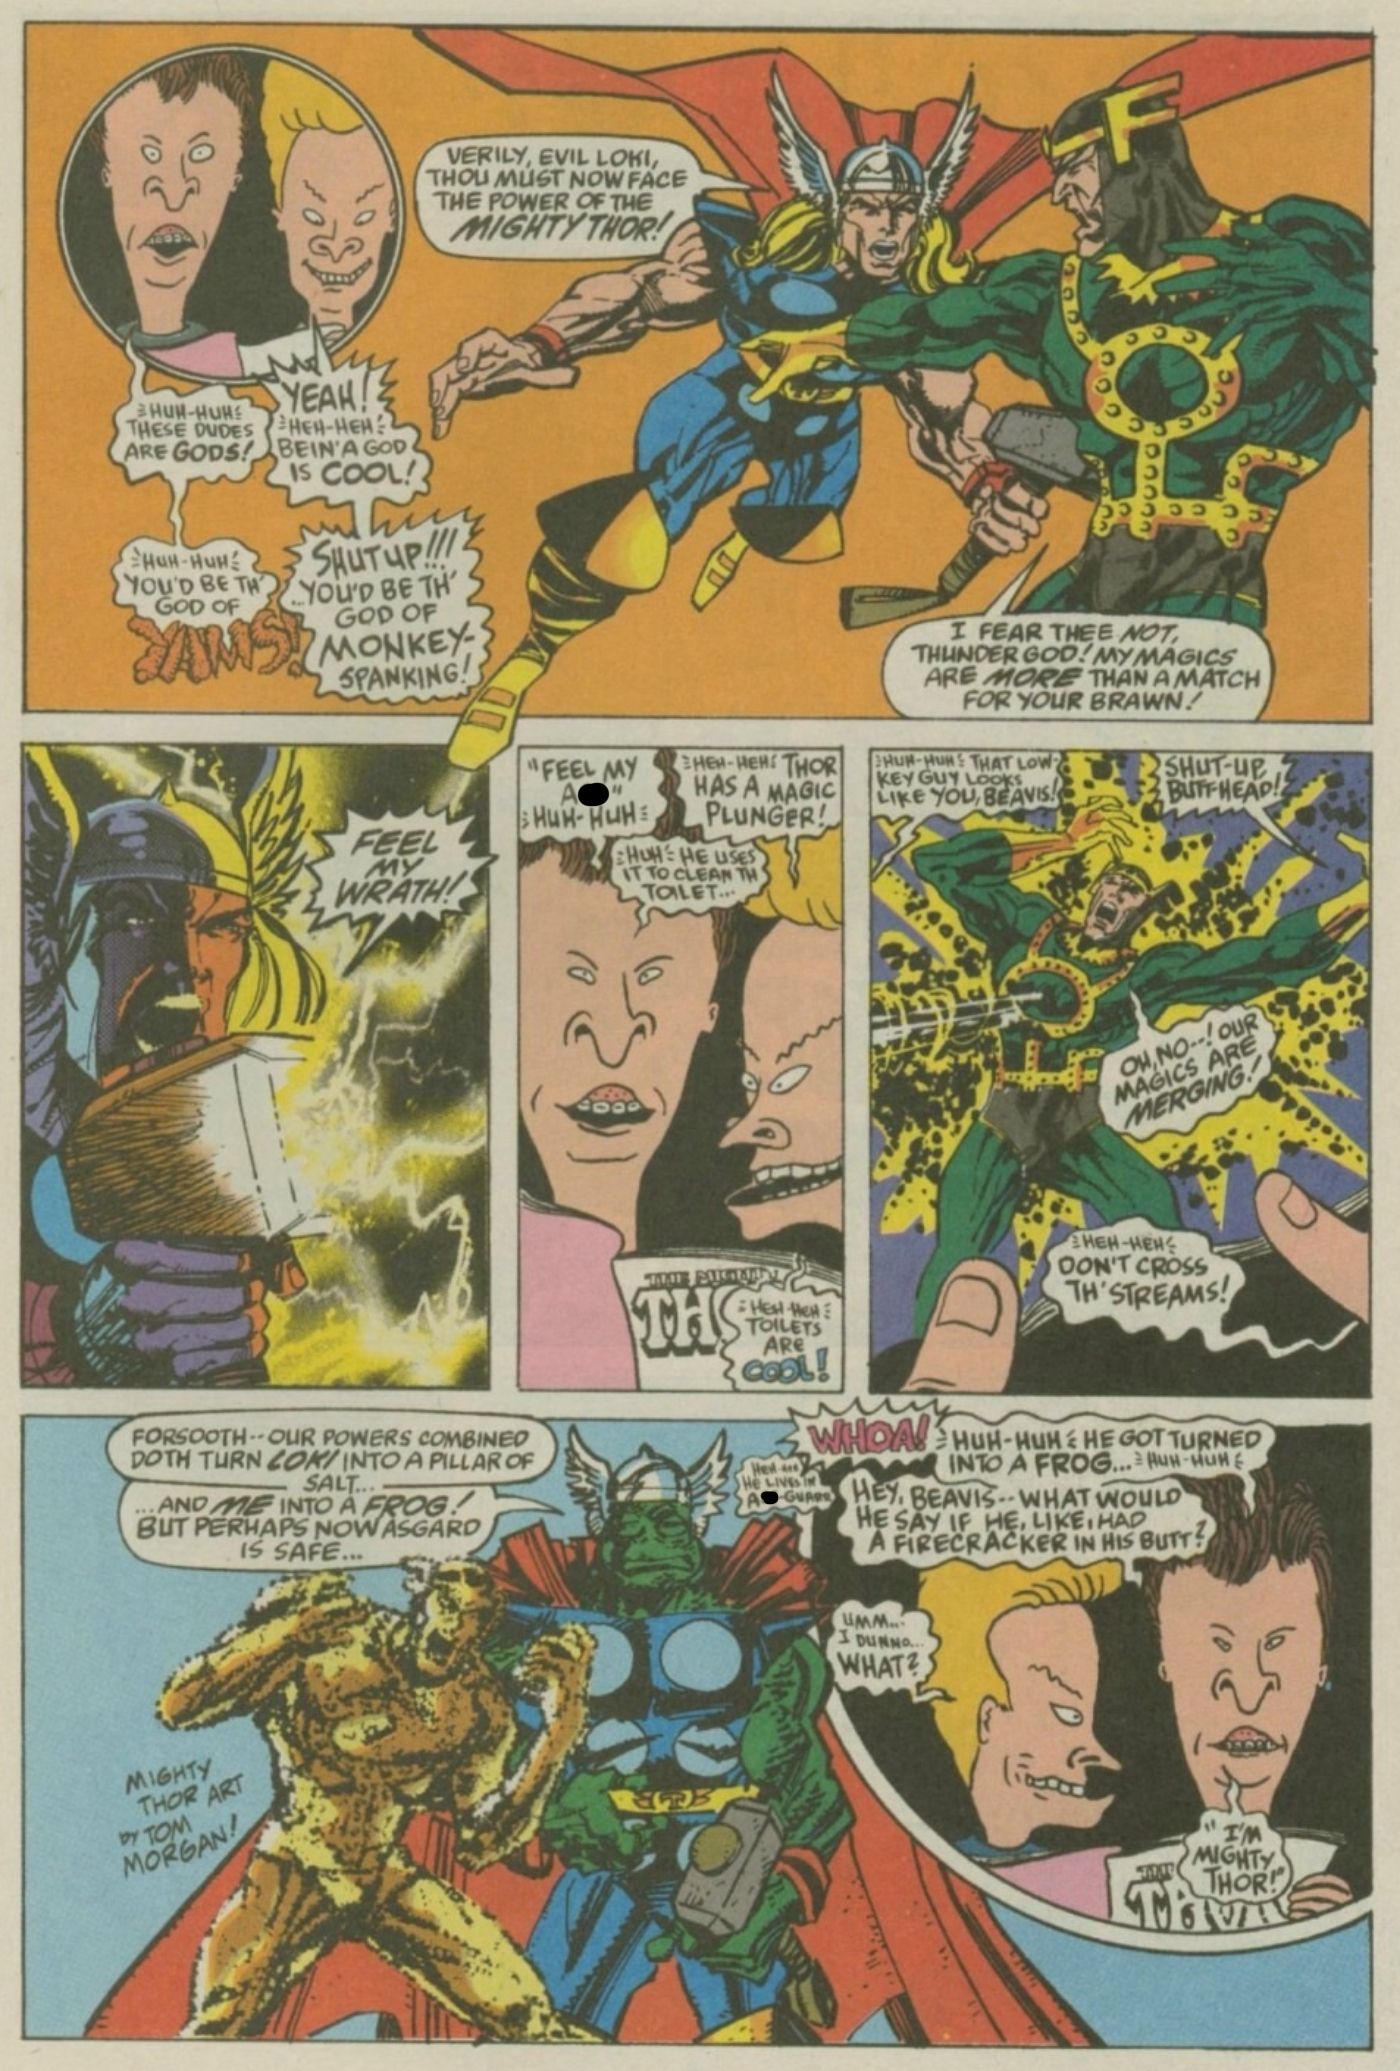 Beavis and Butt-Head reading an issue of The Mighty Thor.